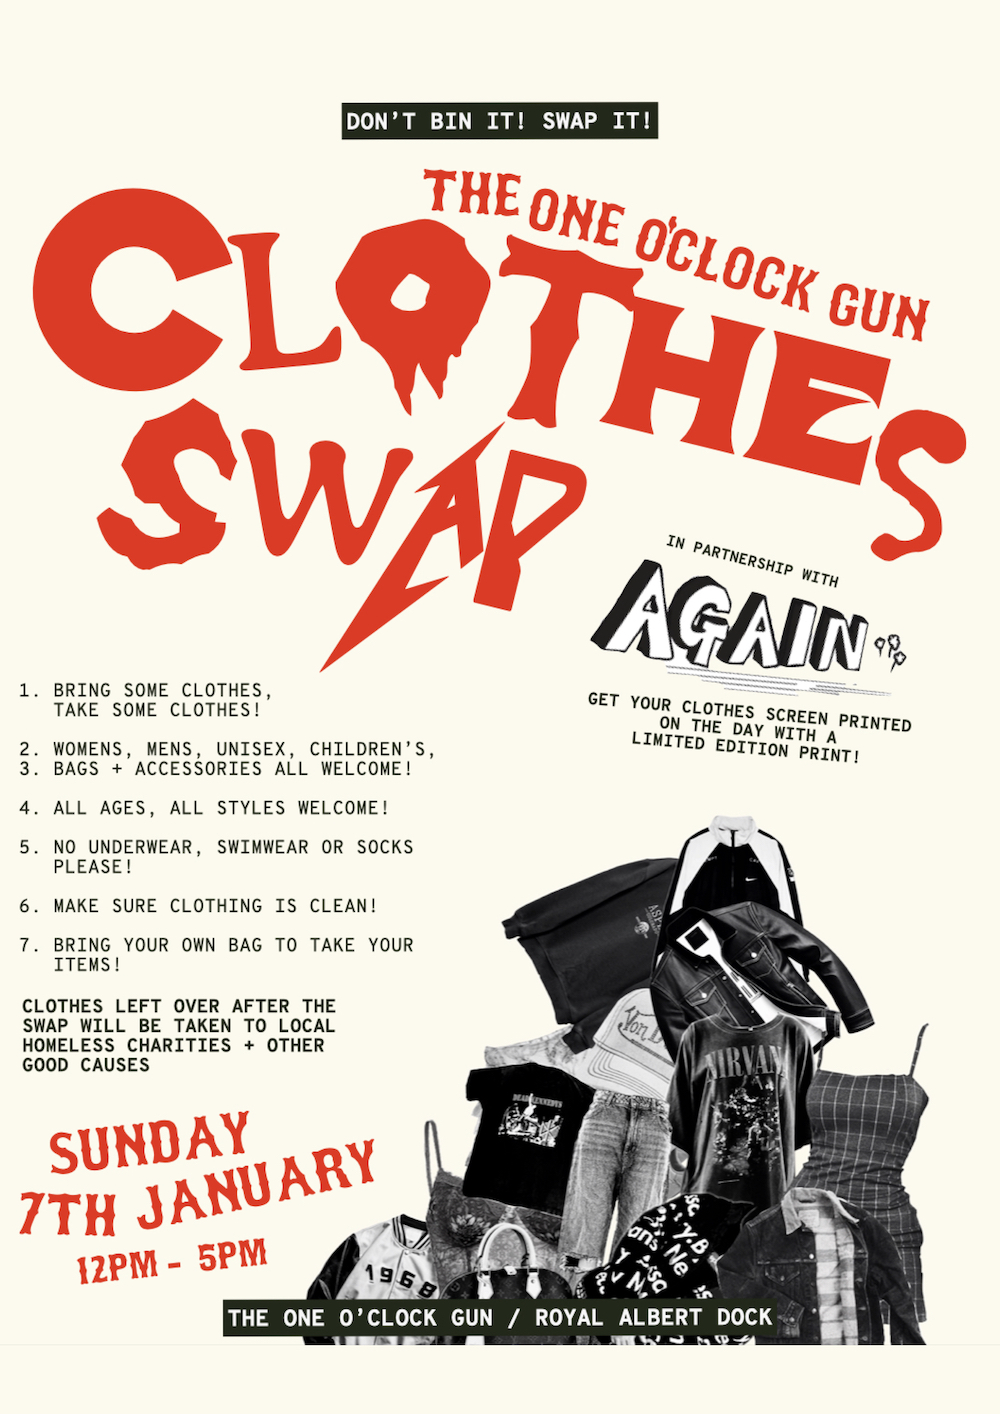 Free clothes swap One O'clock Gun - The Guide Liverpool